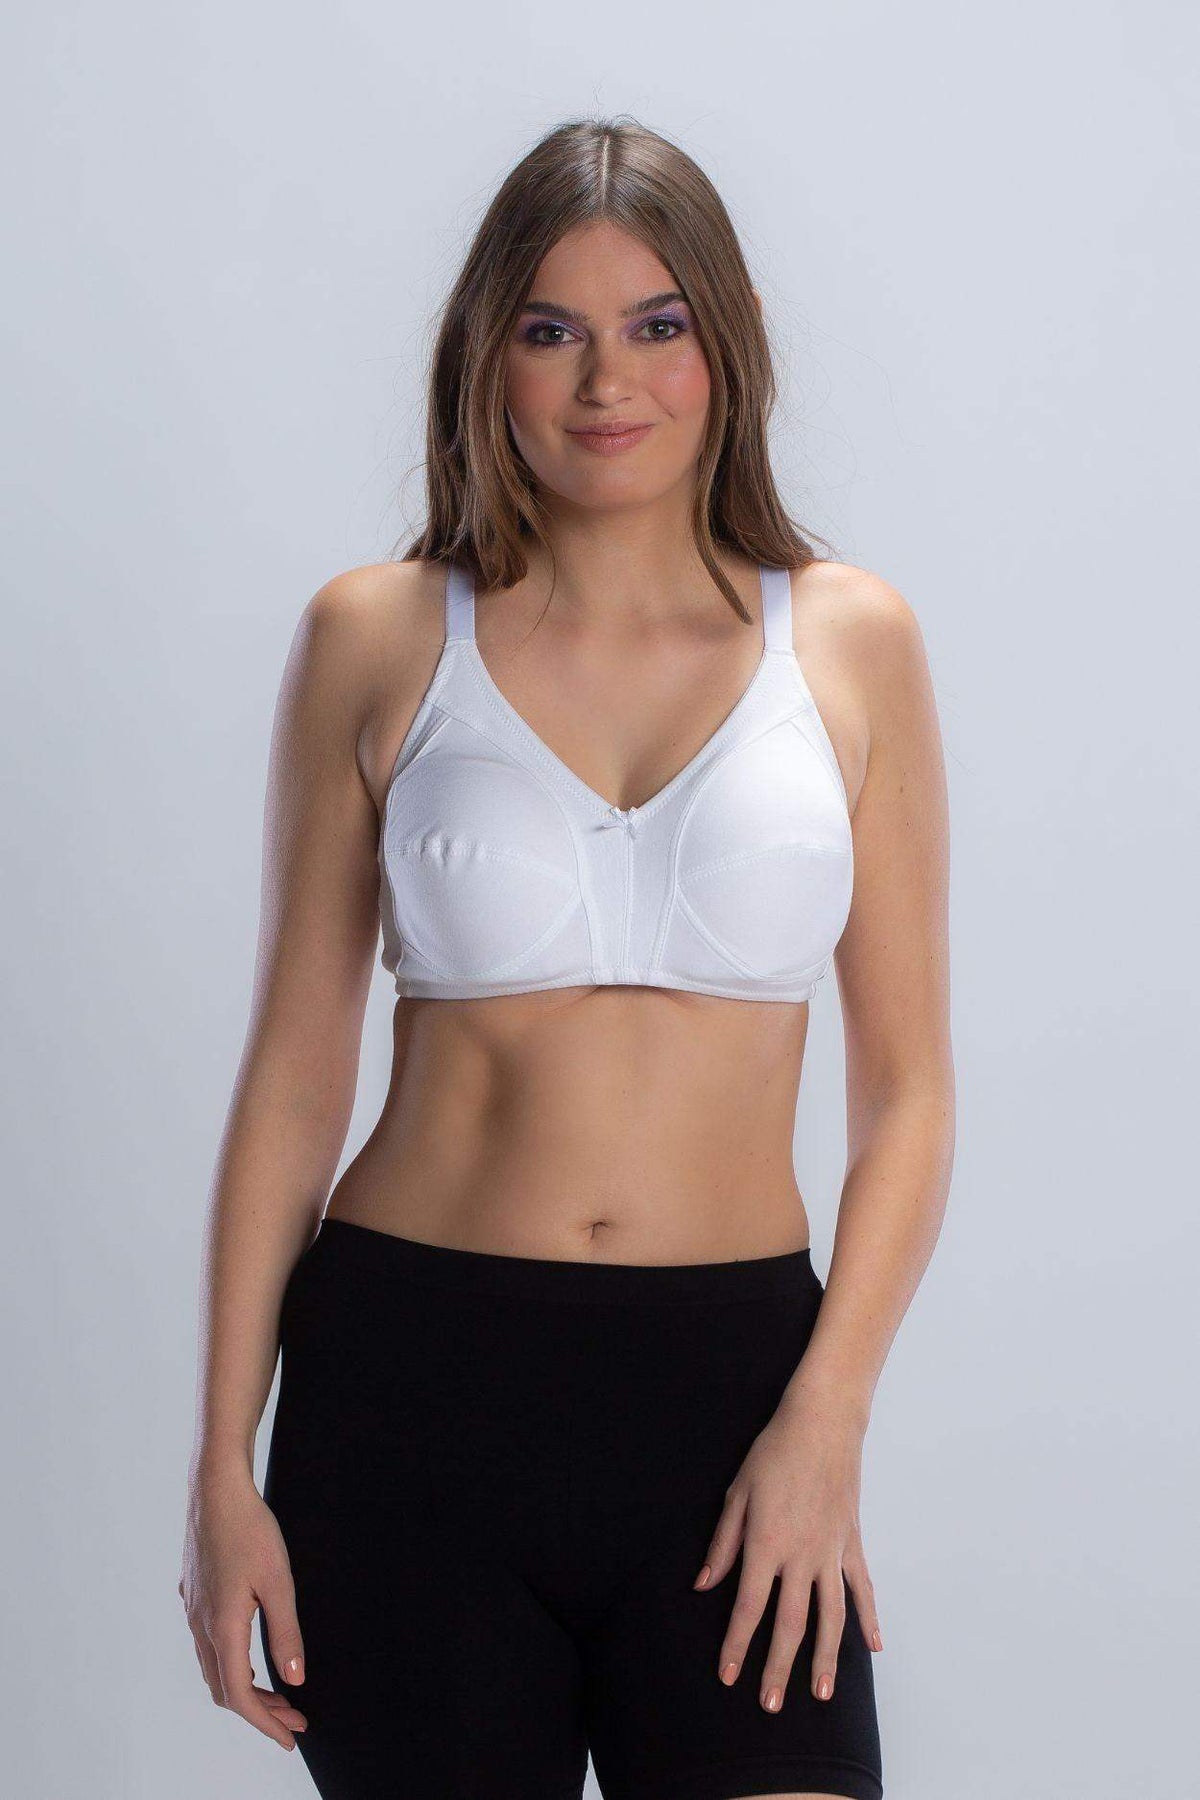 Carina Multi Color Girls Bra For Women: Buy Online at Best Price in Egypt -  Souq is now